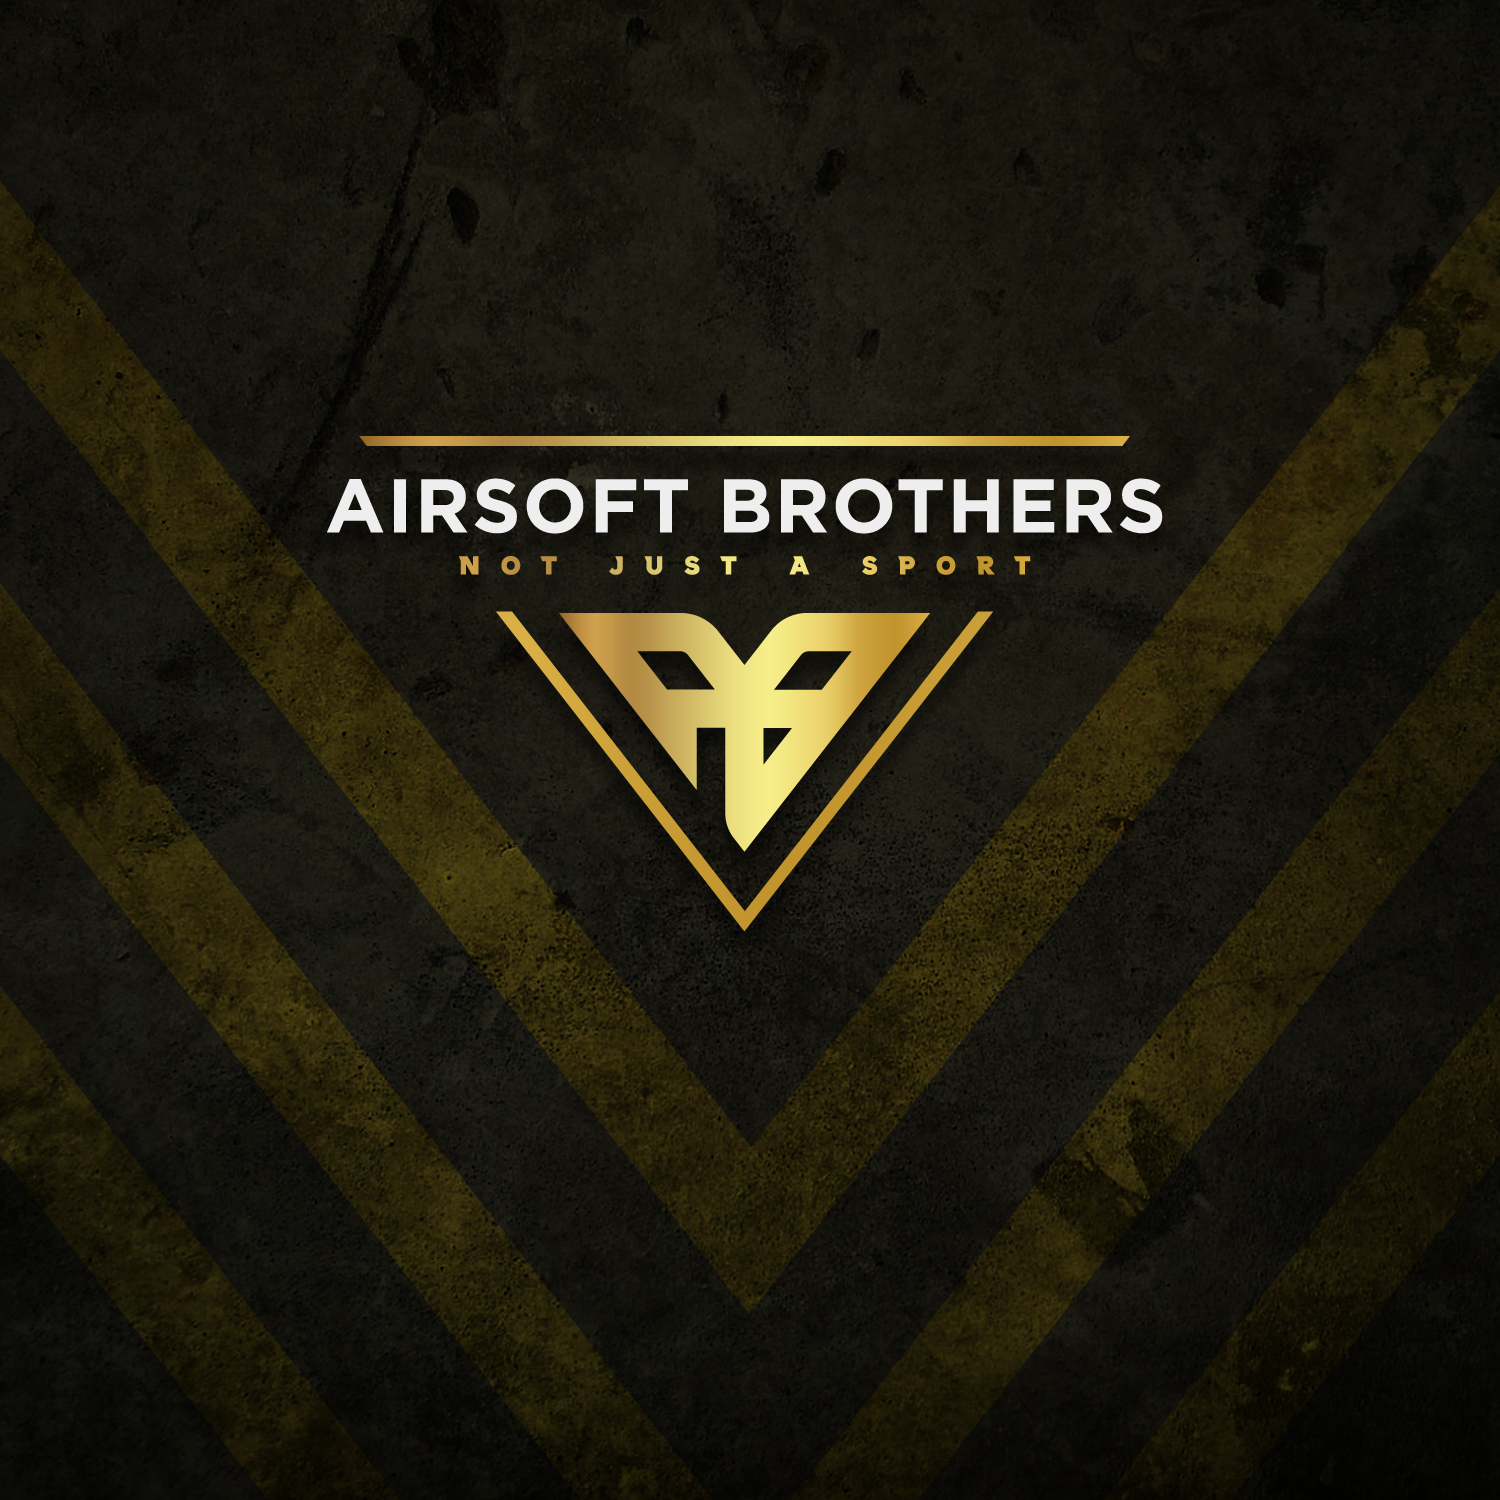 Nu airsoften bij Airsoft Brothers